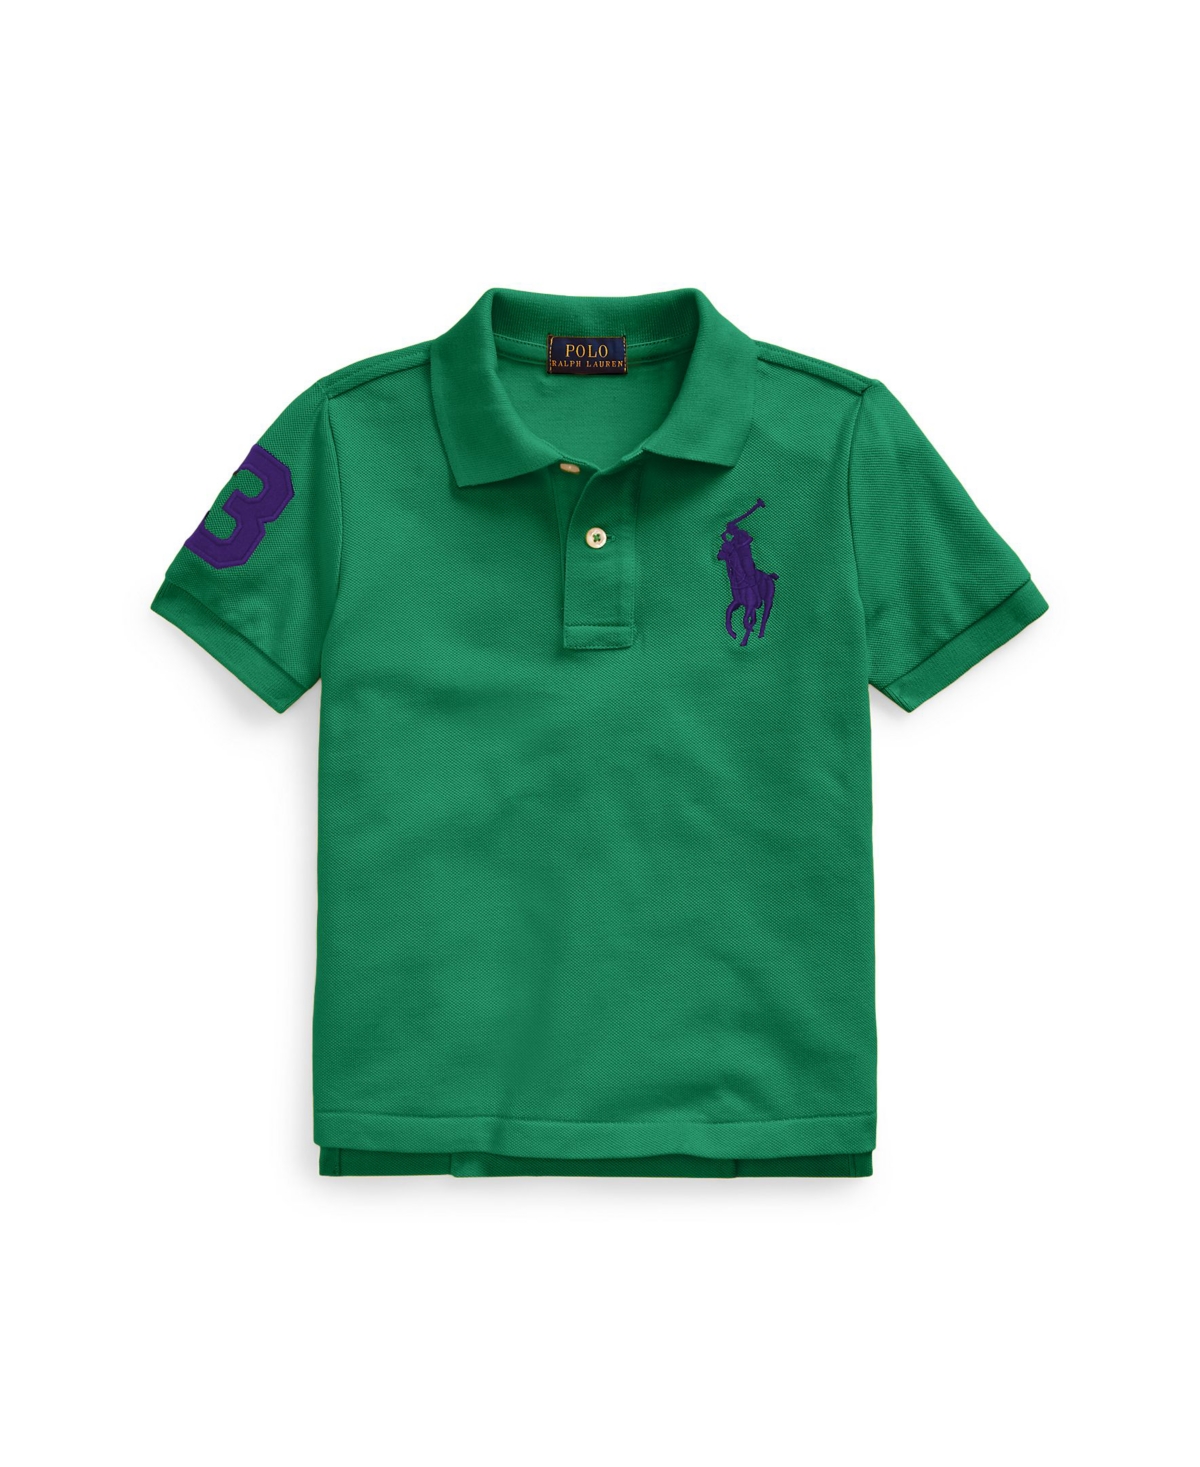 Polo Ralph Lauren Kids' Toddler And Little Boys Big Pony Cotton Mesh Polo Shirt In Athletic Green